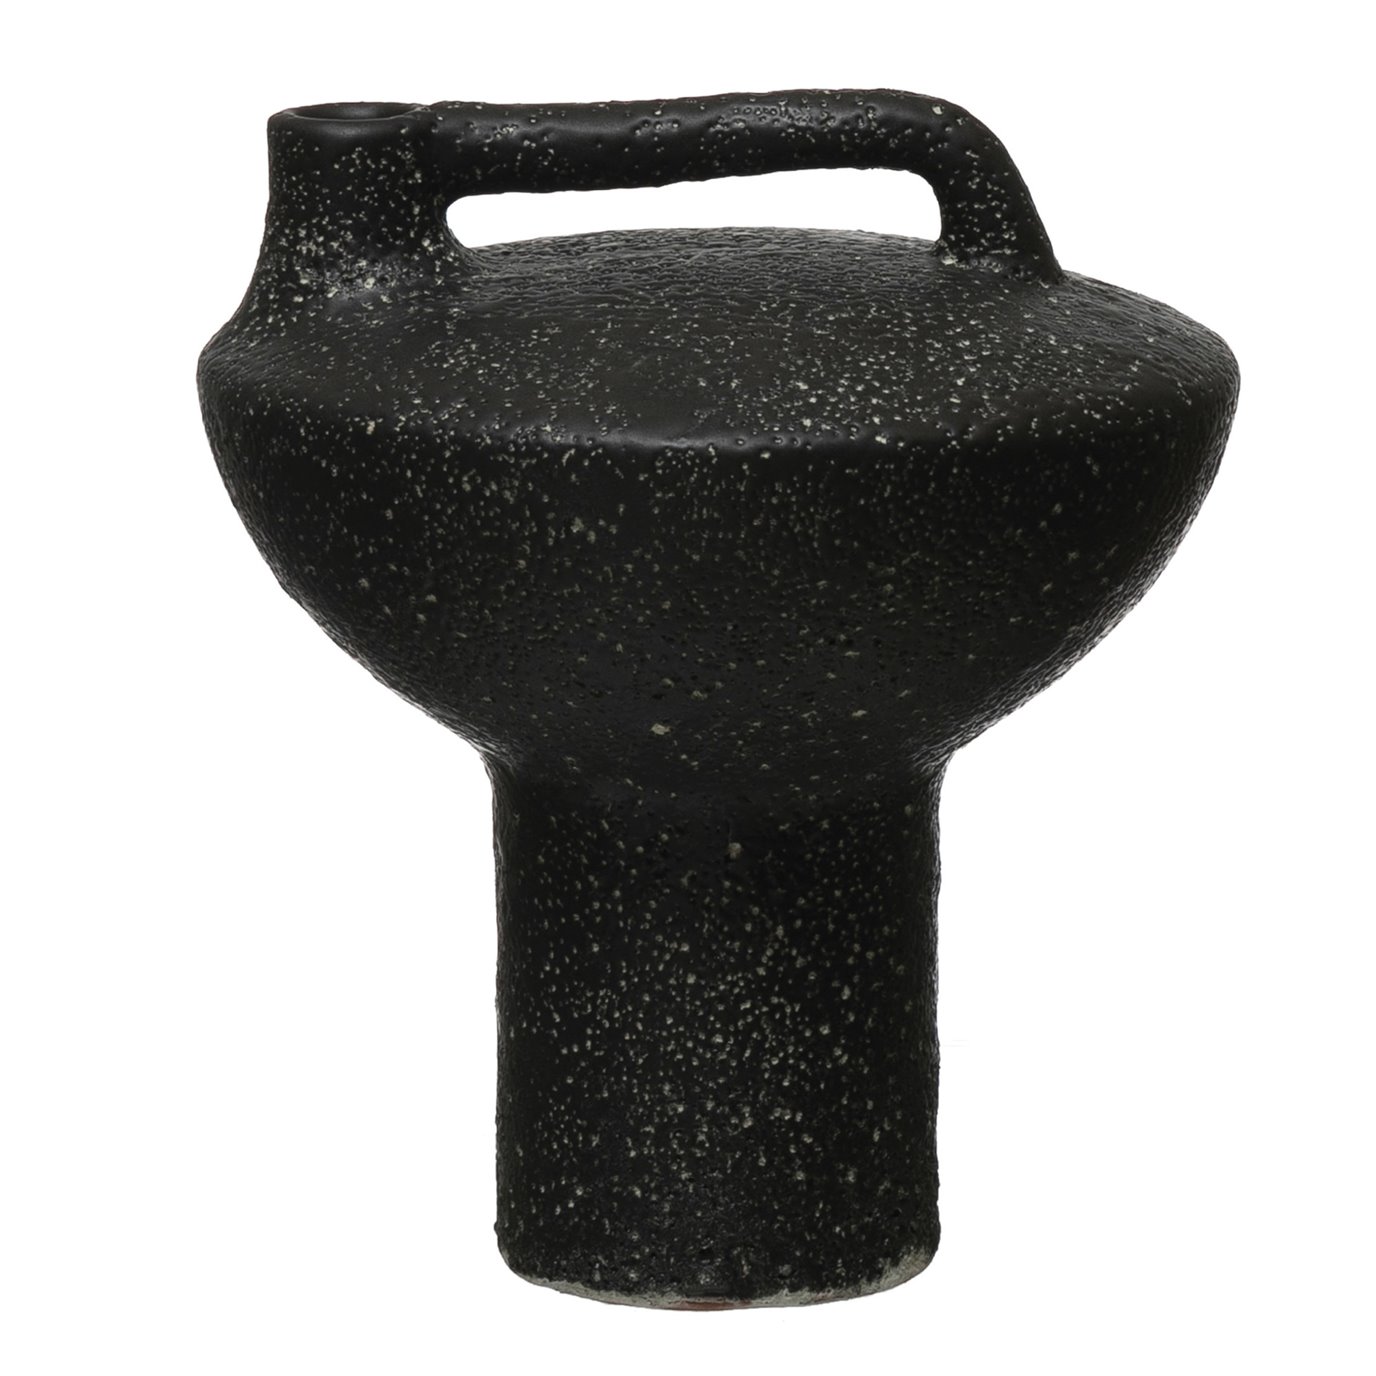 Terra-cotta Vase with Handle, Volcano Finish, Black (Each One Will Vary)